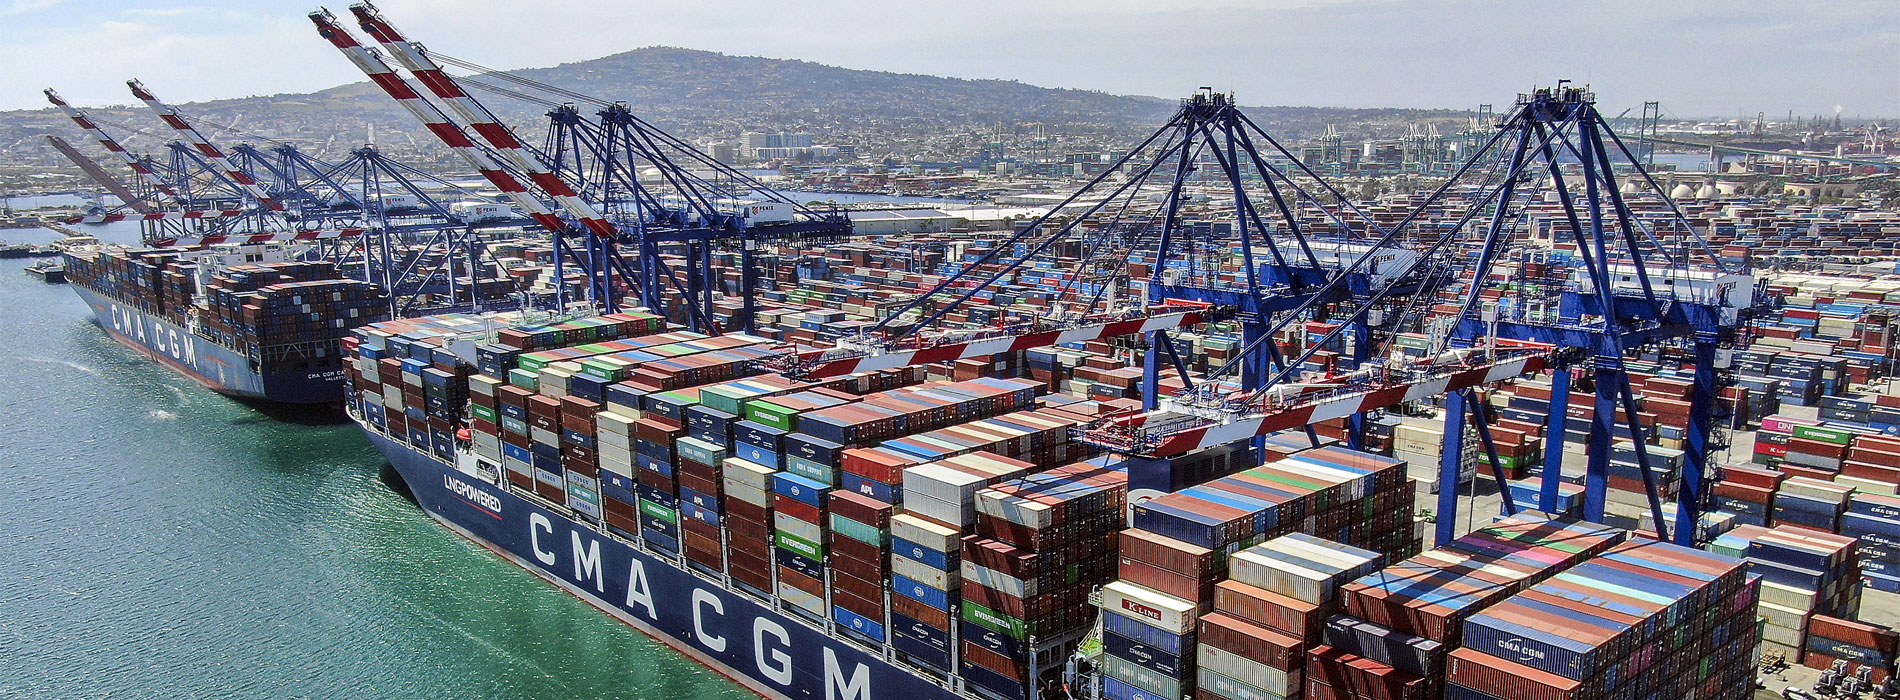 Cmacgm 1900x700 launching early container return incentive program